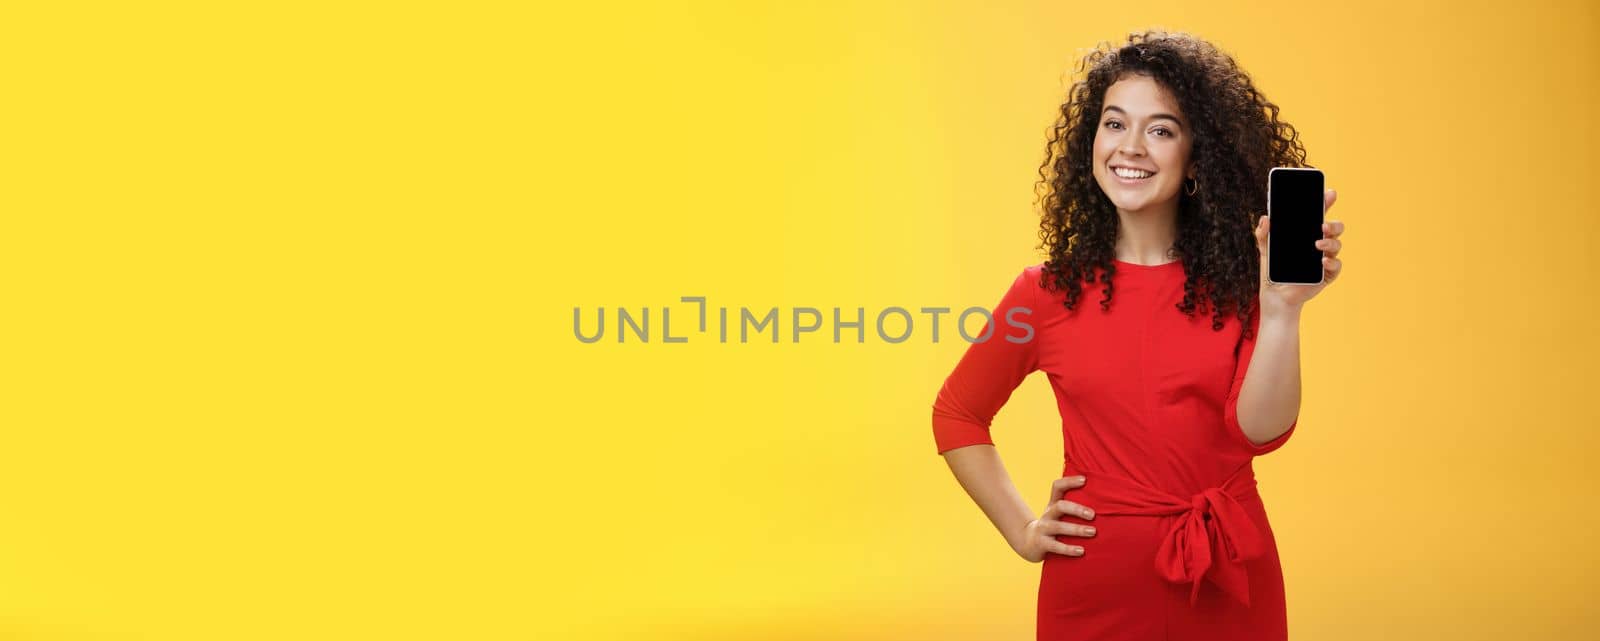 Girl brag with new phone she got on christmas feeling delighted holding mobile device in hand showing smartphone screena t camera, smiling broadly with uplifted mood over yellow background. Technology concept